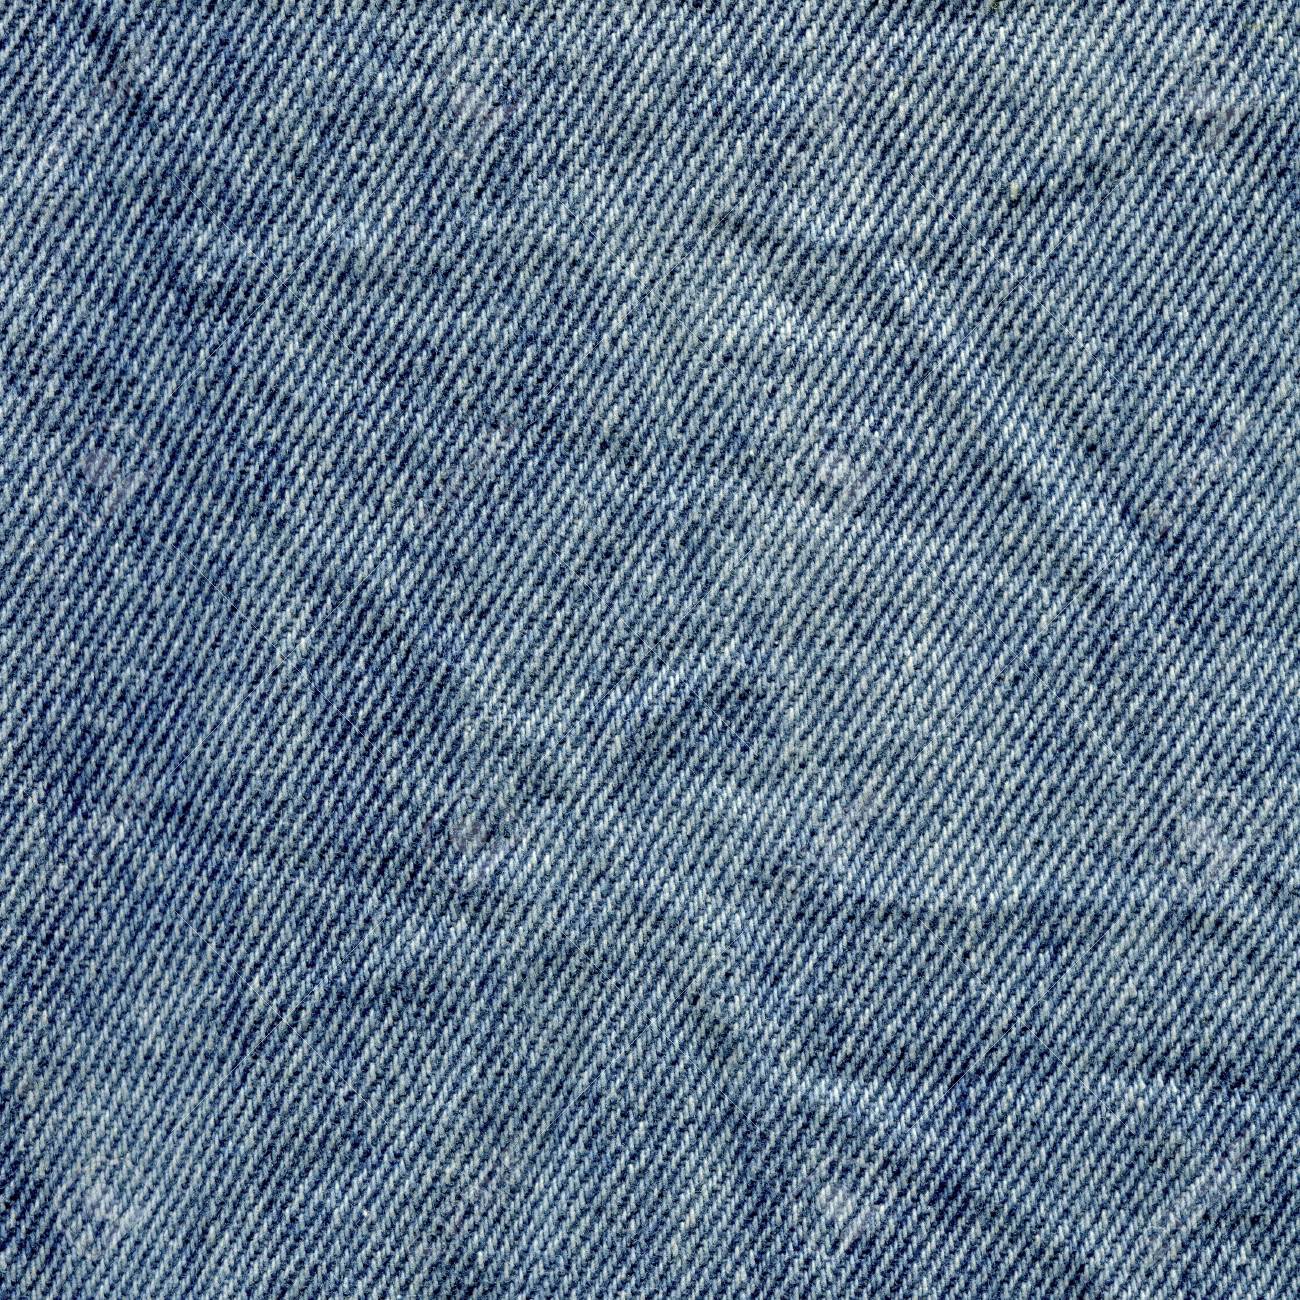 🔥 Download Blue Jean Texture Background Fabric Jeans Wallpaper Stock ...